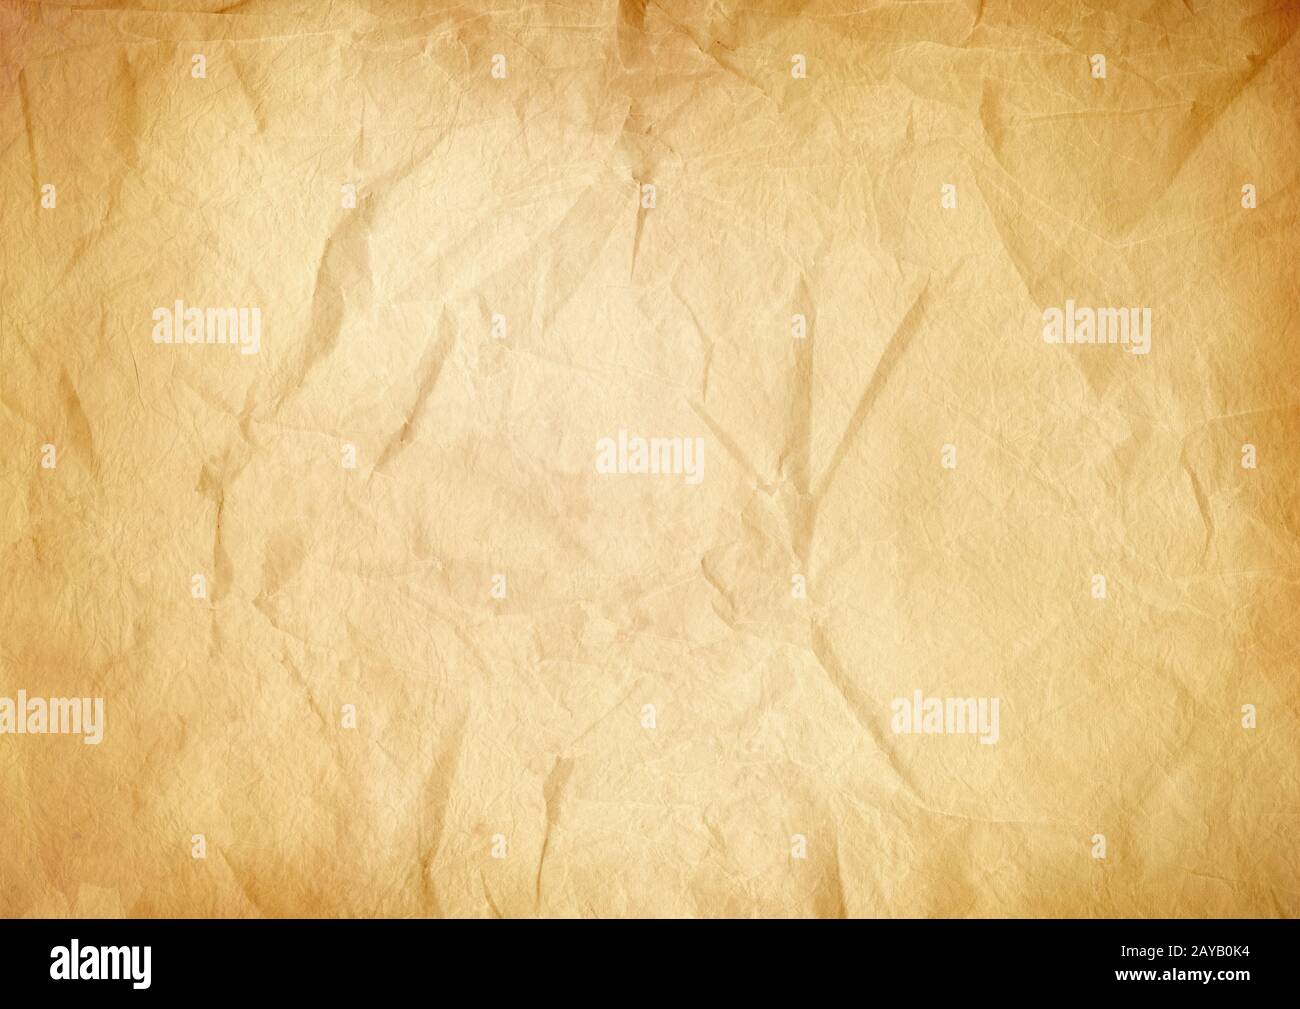 Old brown crumpled paper texture background Stock Photo - Alamy